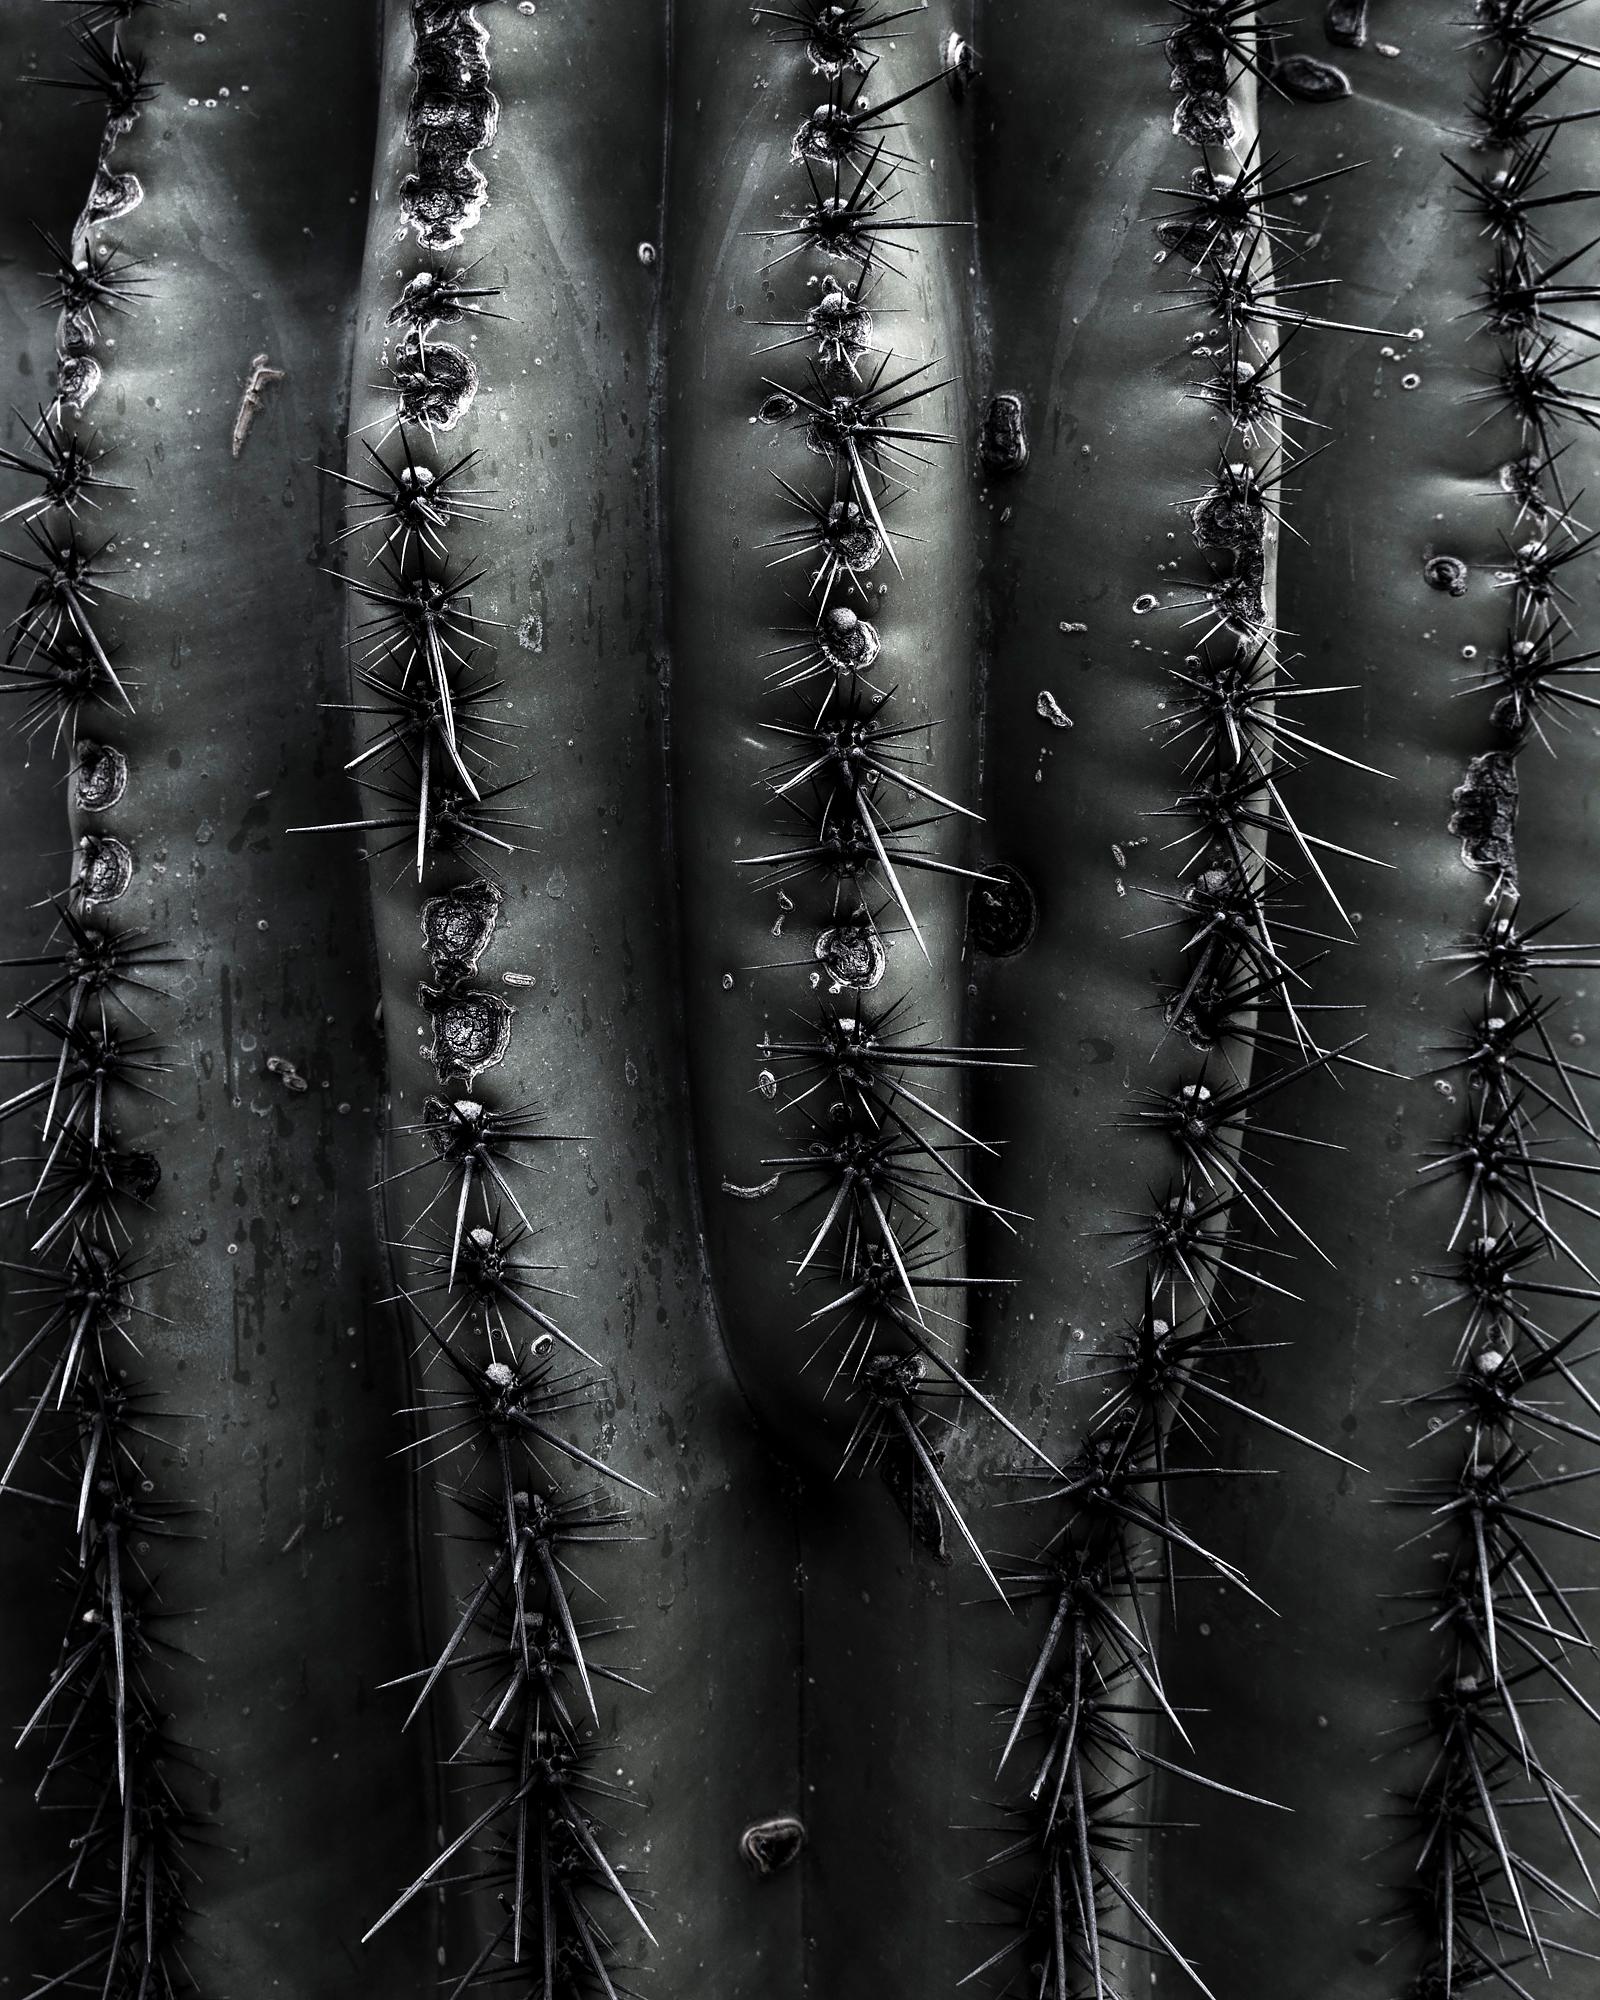 Limited Edition Prints from Desert Bellows, A Saguaro Series by Andrew Johnson 4